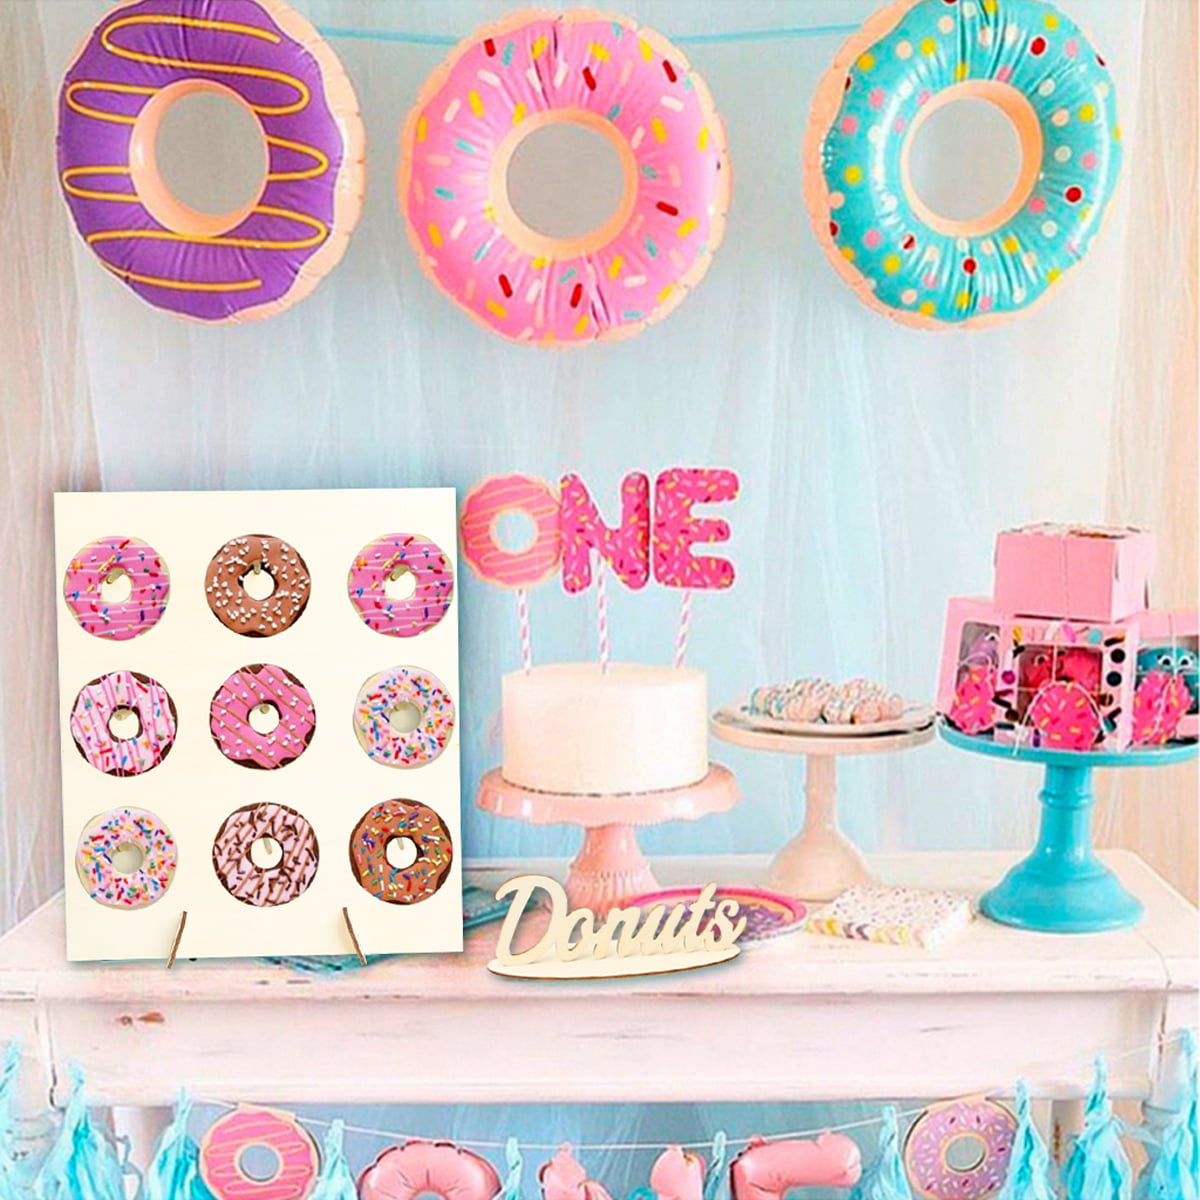 9X Wooden Donuts Wall Stand Doughnut Holder Display Birthday Party Wedding-Xmas 